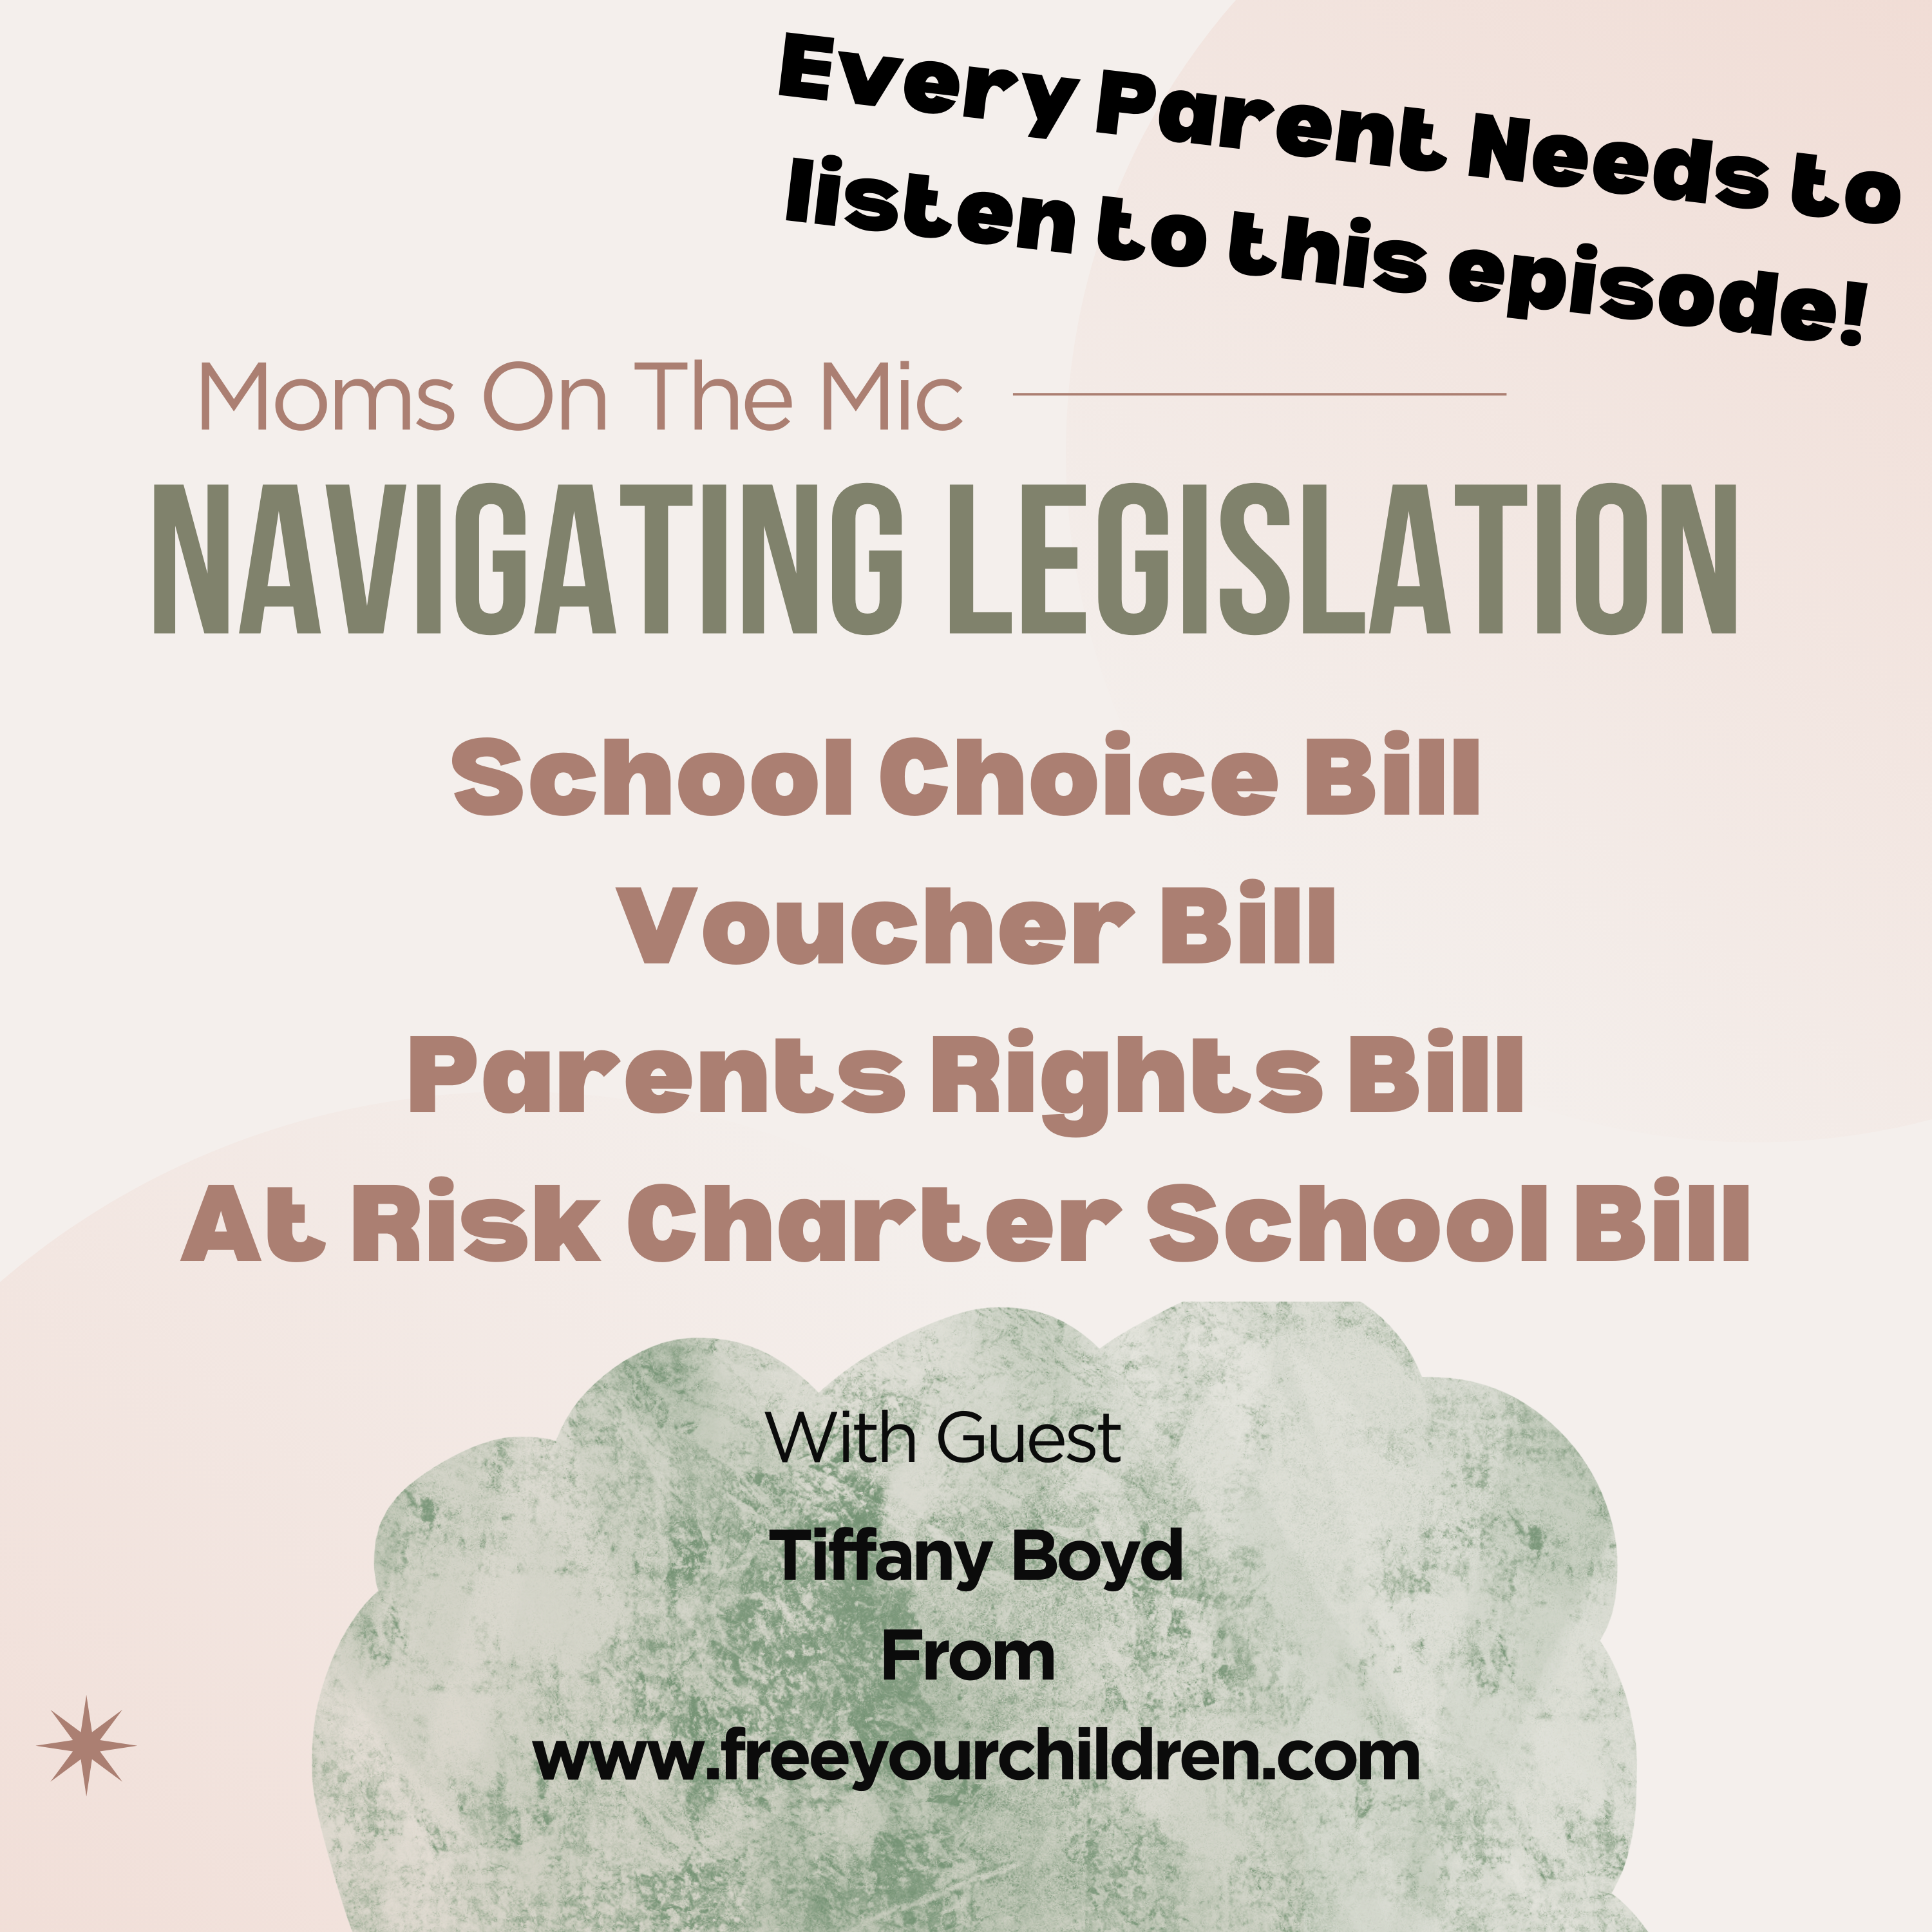 Podcast episode with Tiffany boyd from Free Your Children